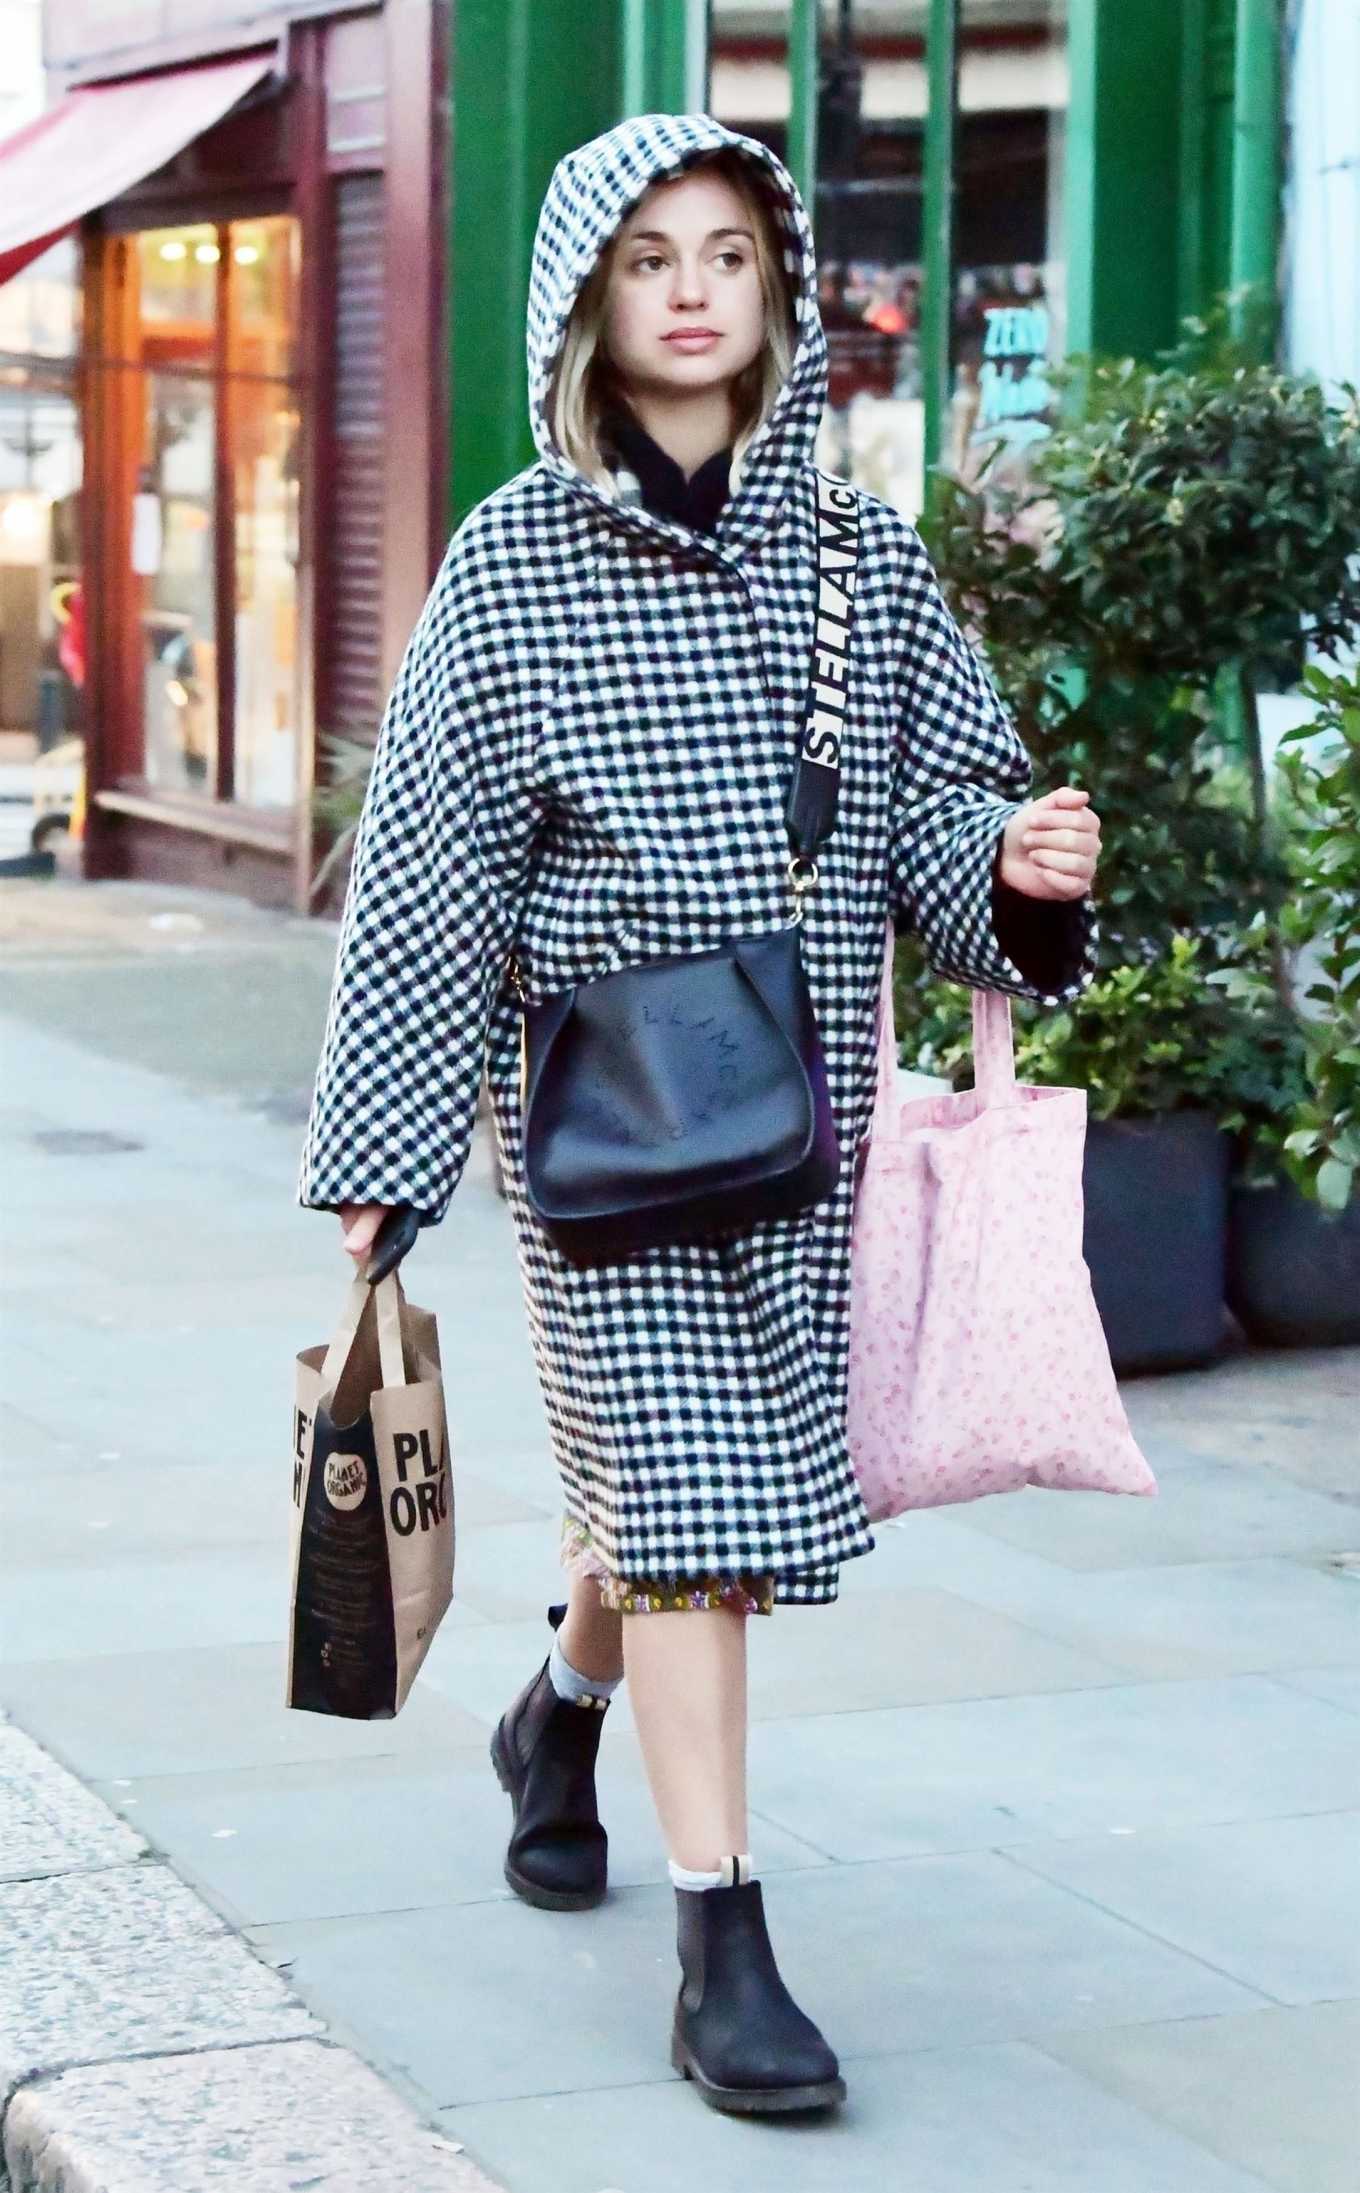 Amelia Windsor - Looks stylis while out in the trendy area of Notting Hill